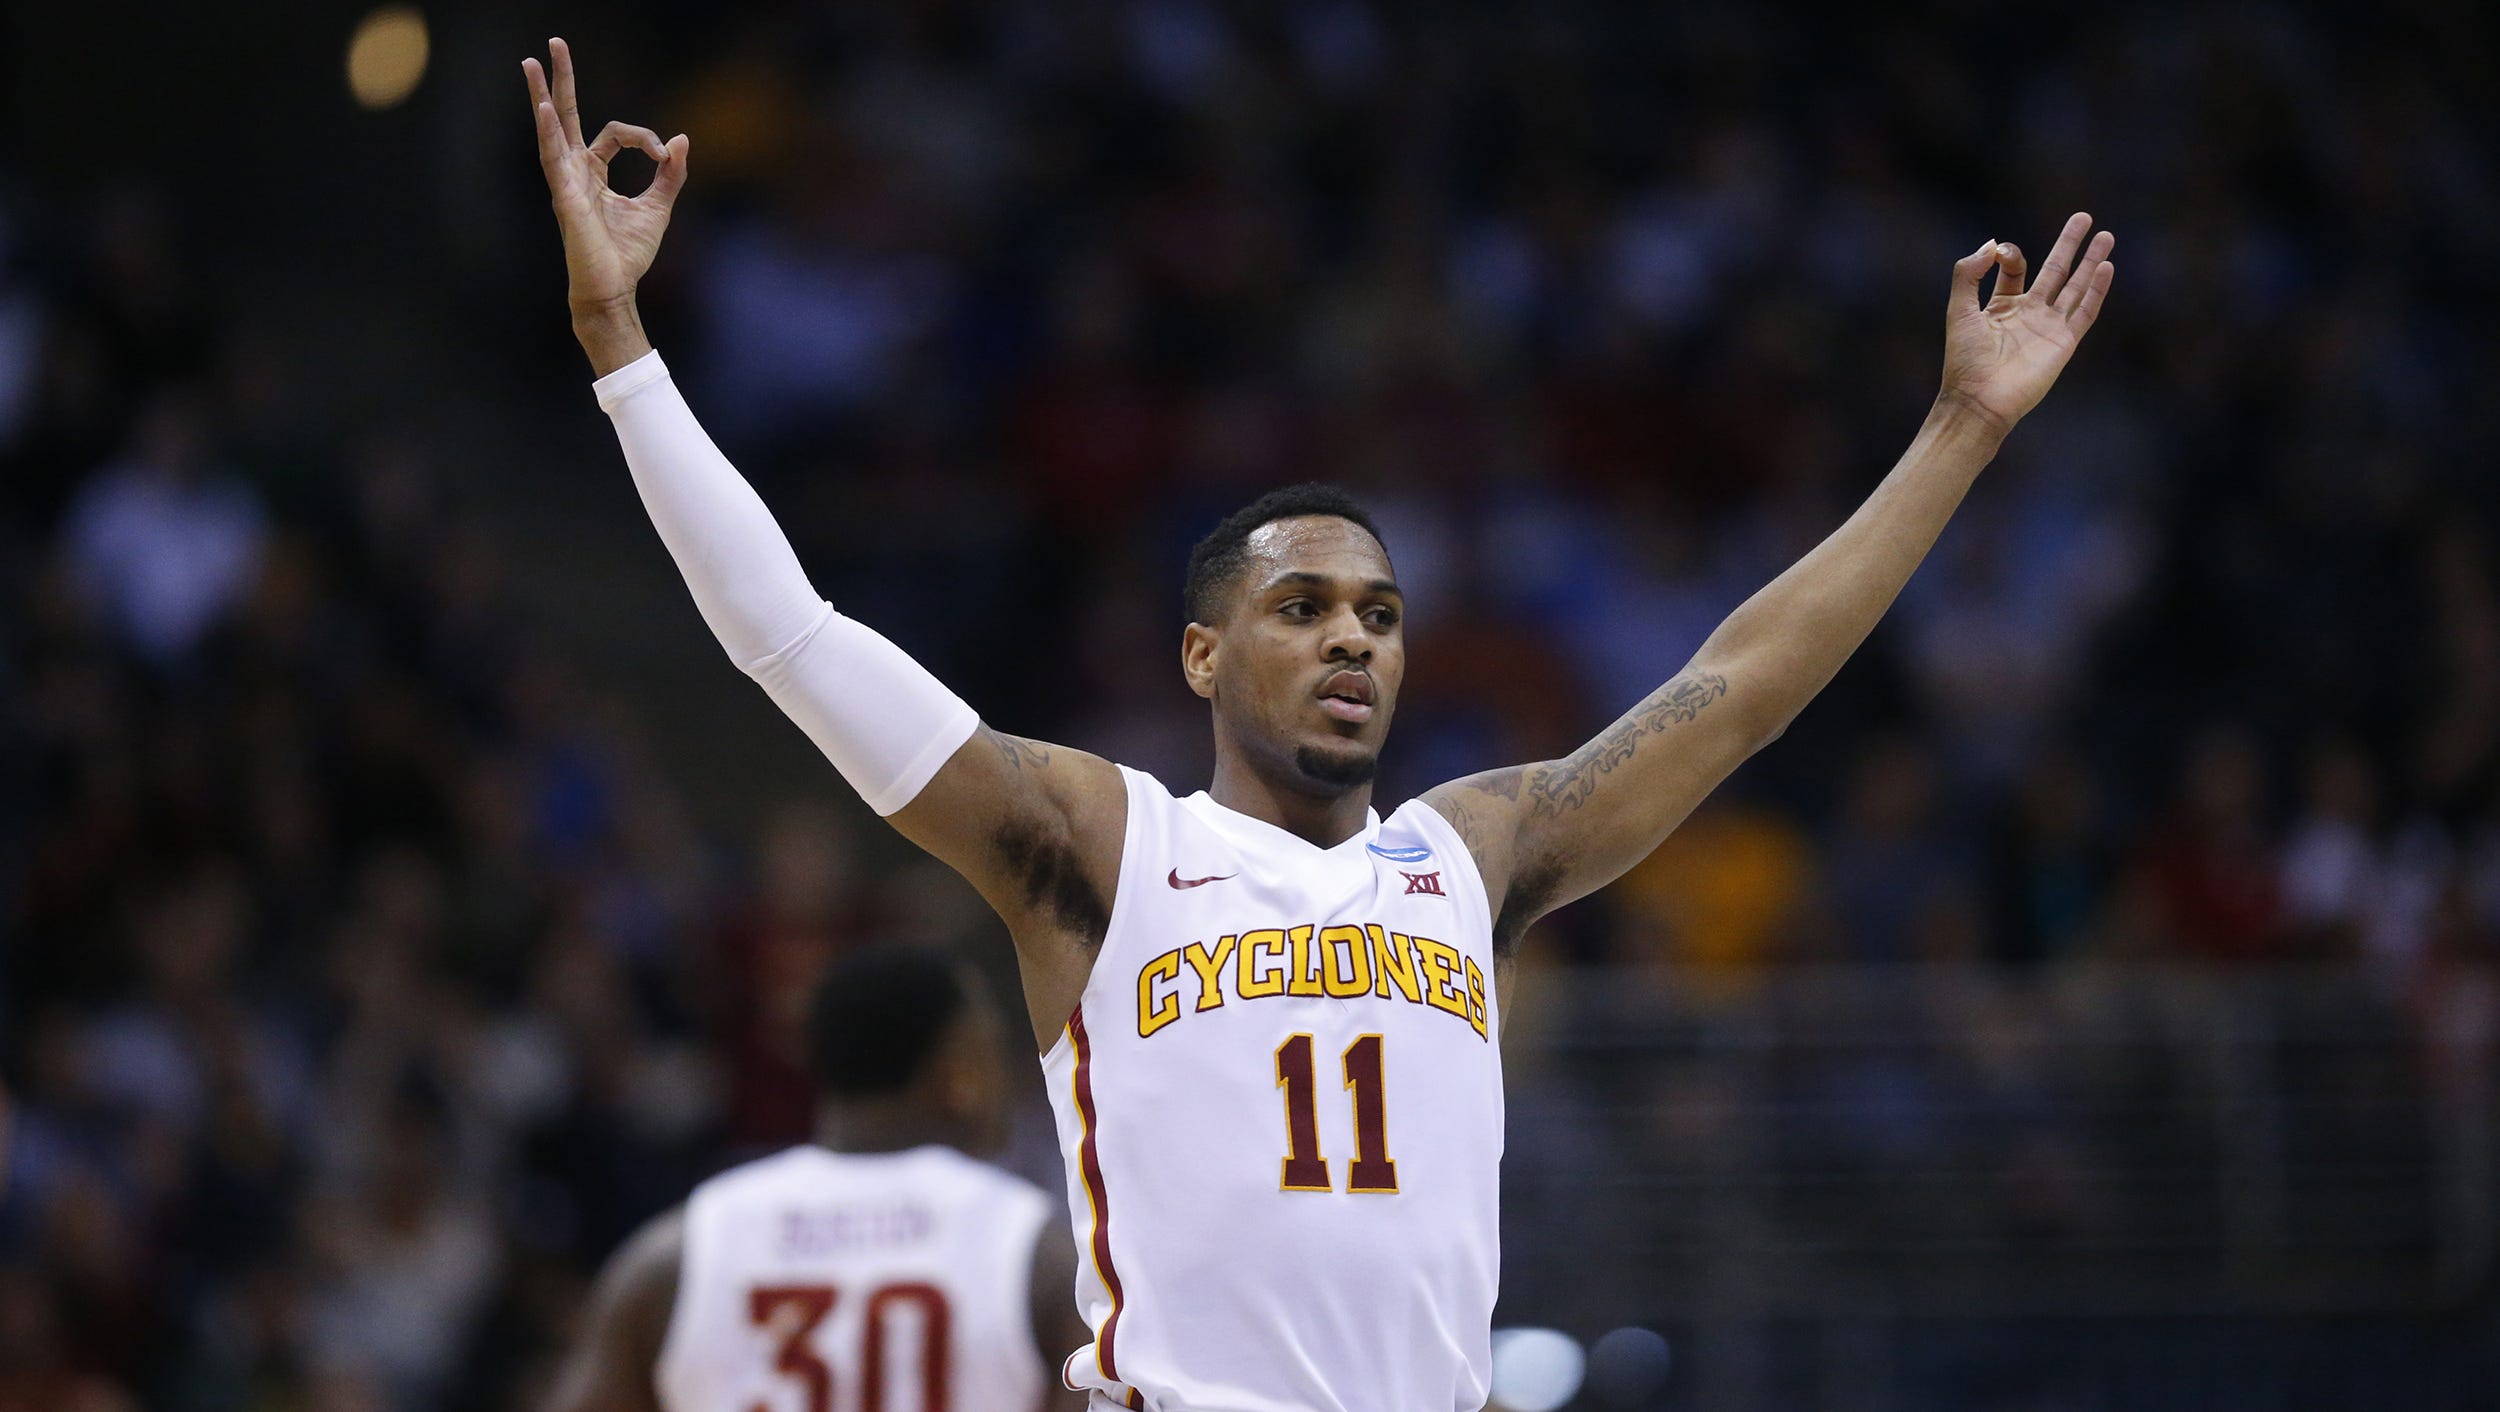 Monte Morris on new NBA contract, extra attention of dating celebrity